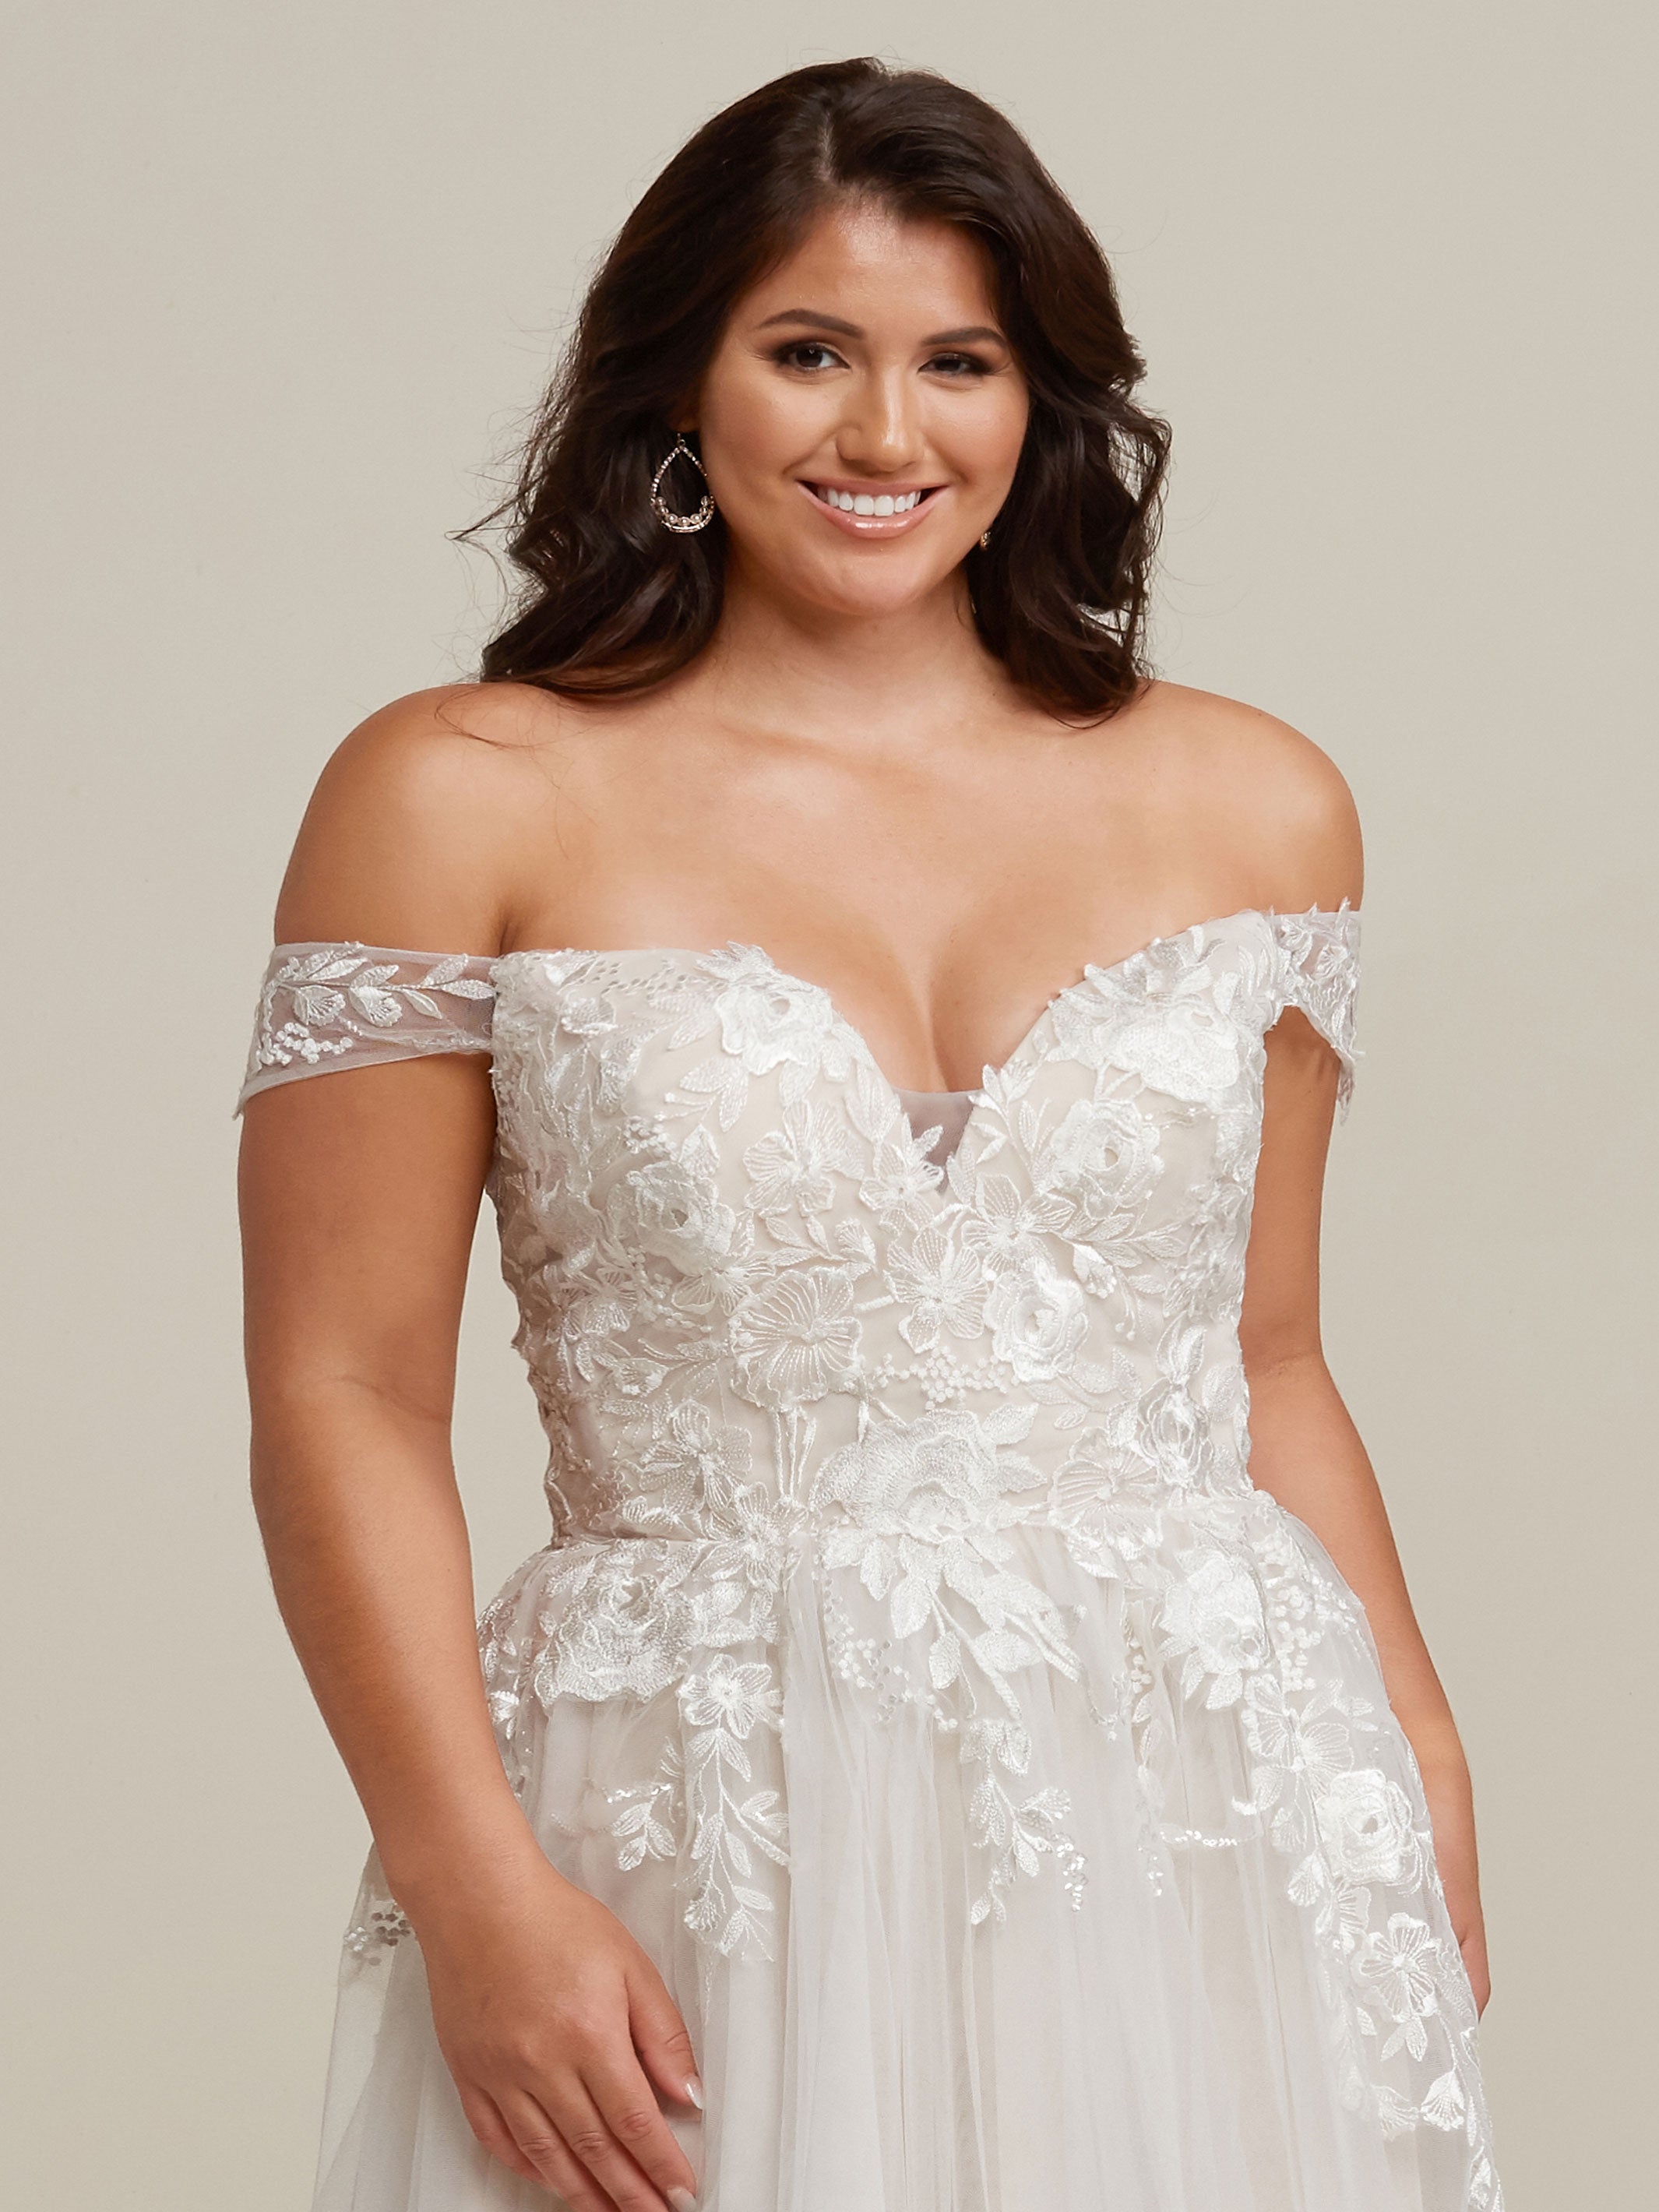 33 Plus Size Wedding Dresses For Your Dreams To Come True  Wedding dresses  plus size, Perfect wedding dress, Champagne colored wedding dresses